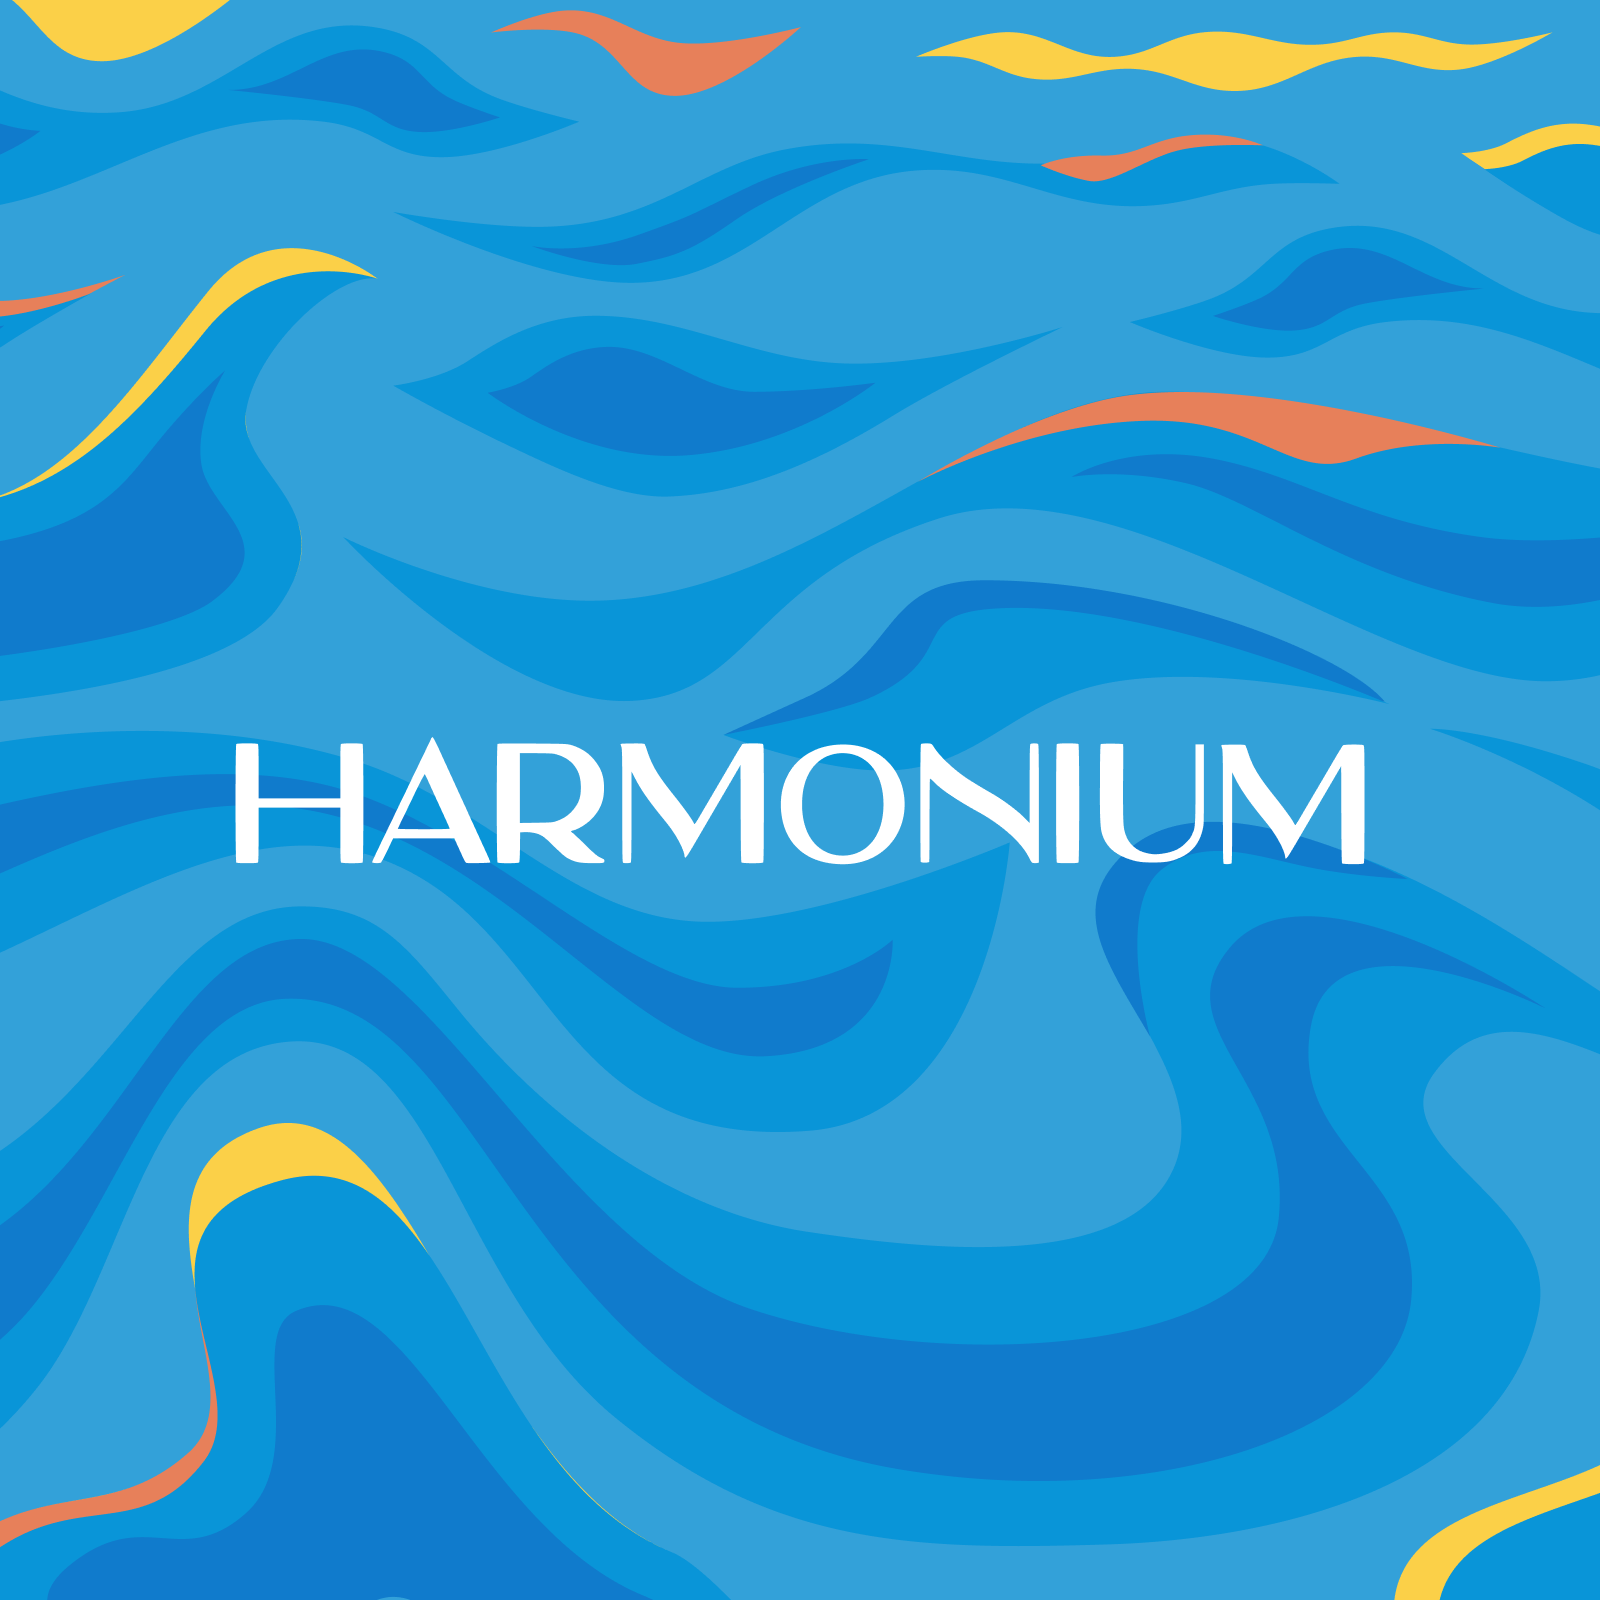 Harmonium logo against a background of blue illustrated waves with yellow and orange accents